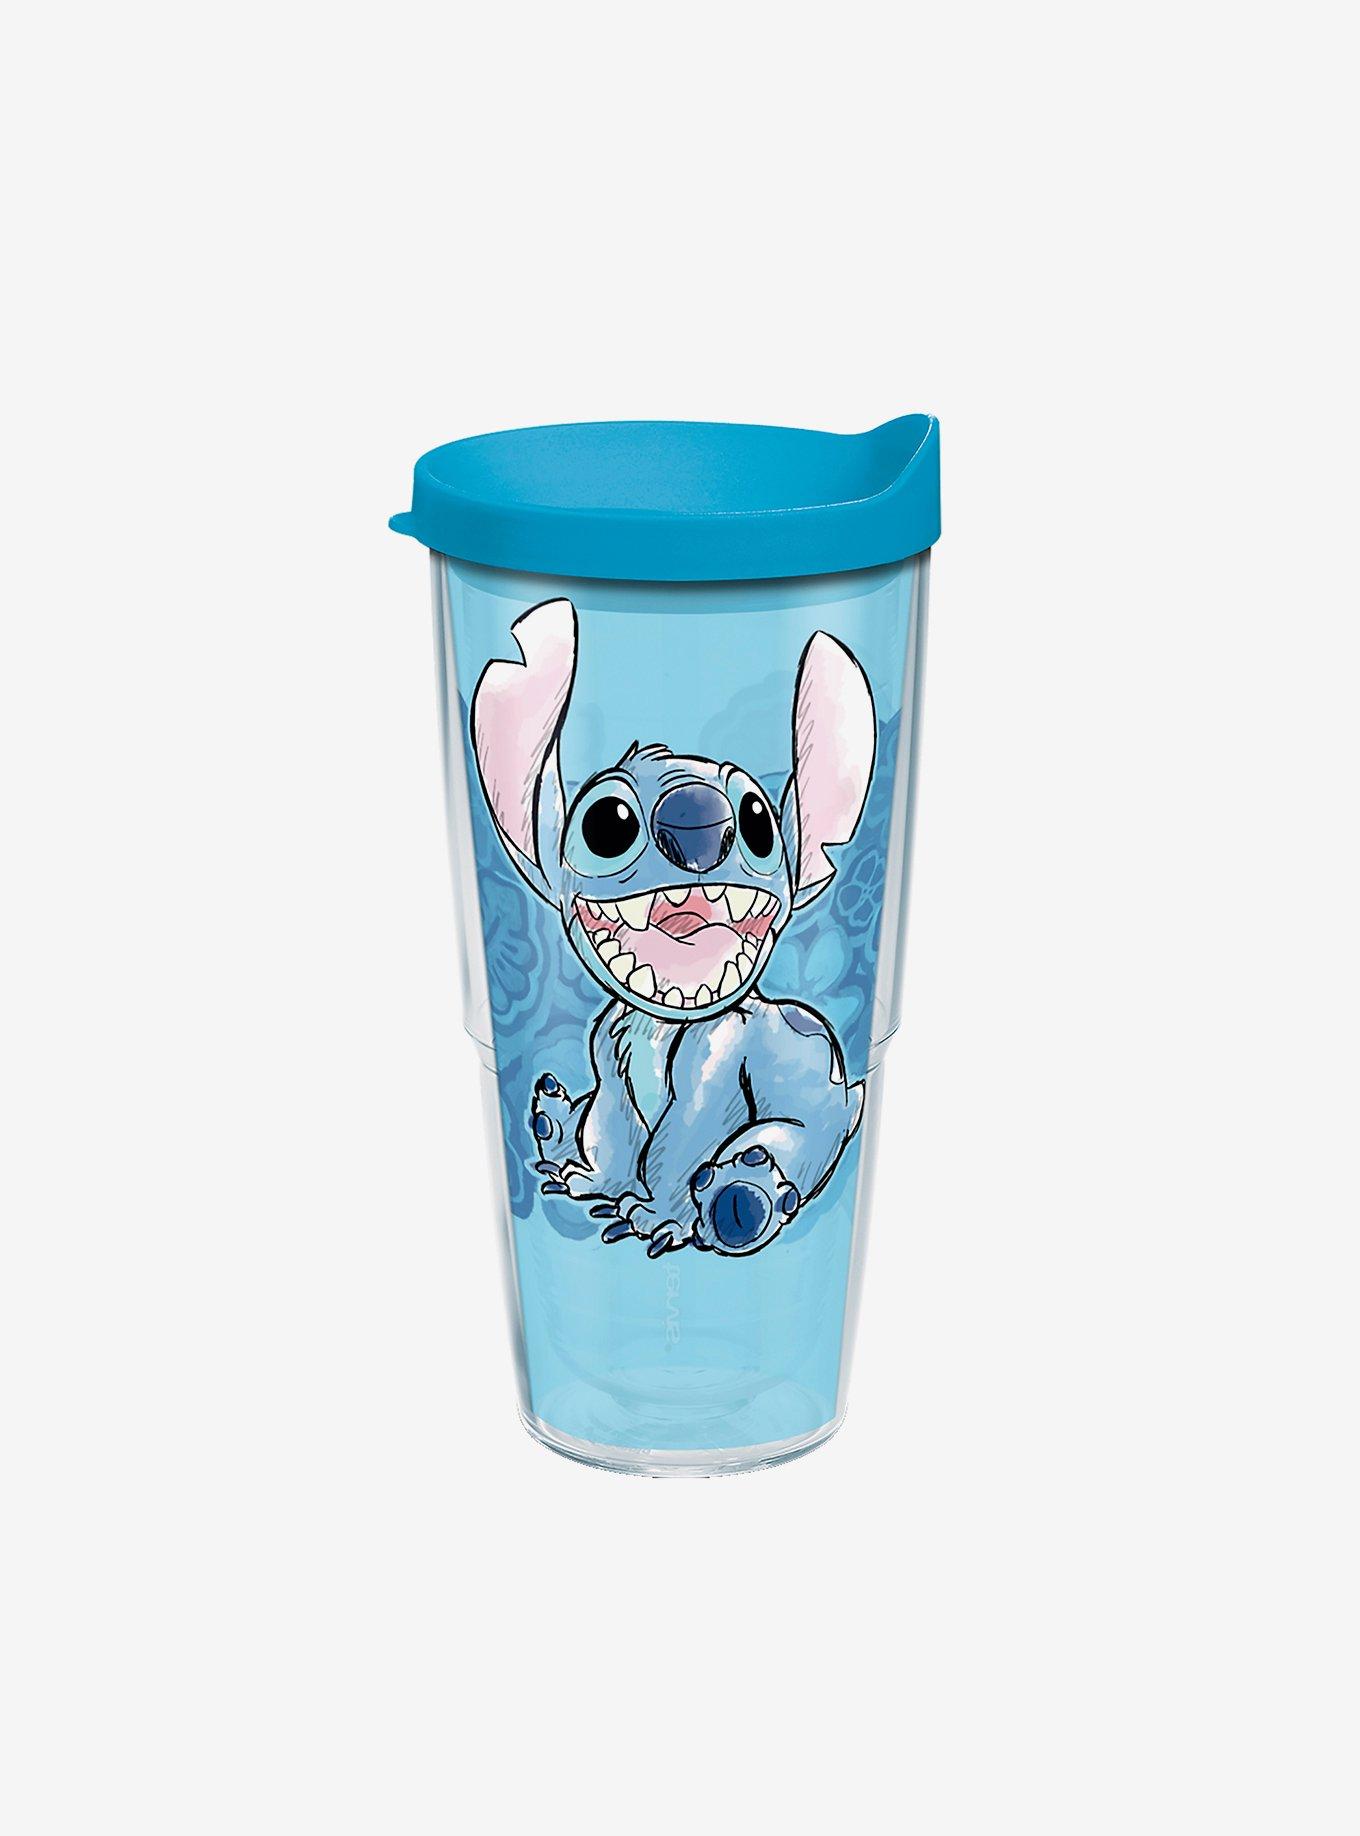 Disney Store Lilo & Stitch STITCH Tumbler with Color Changing Straw New!